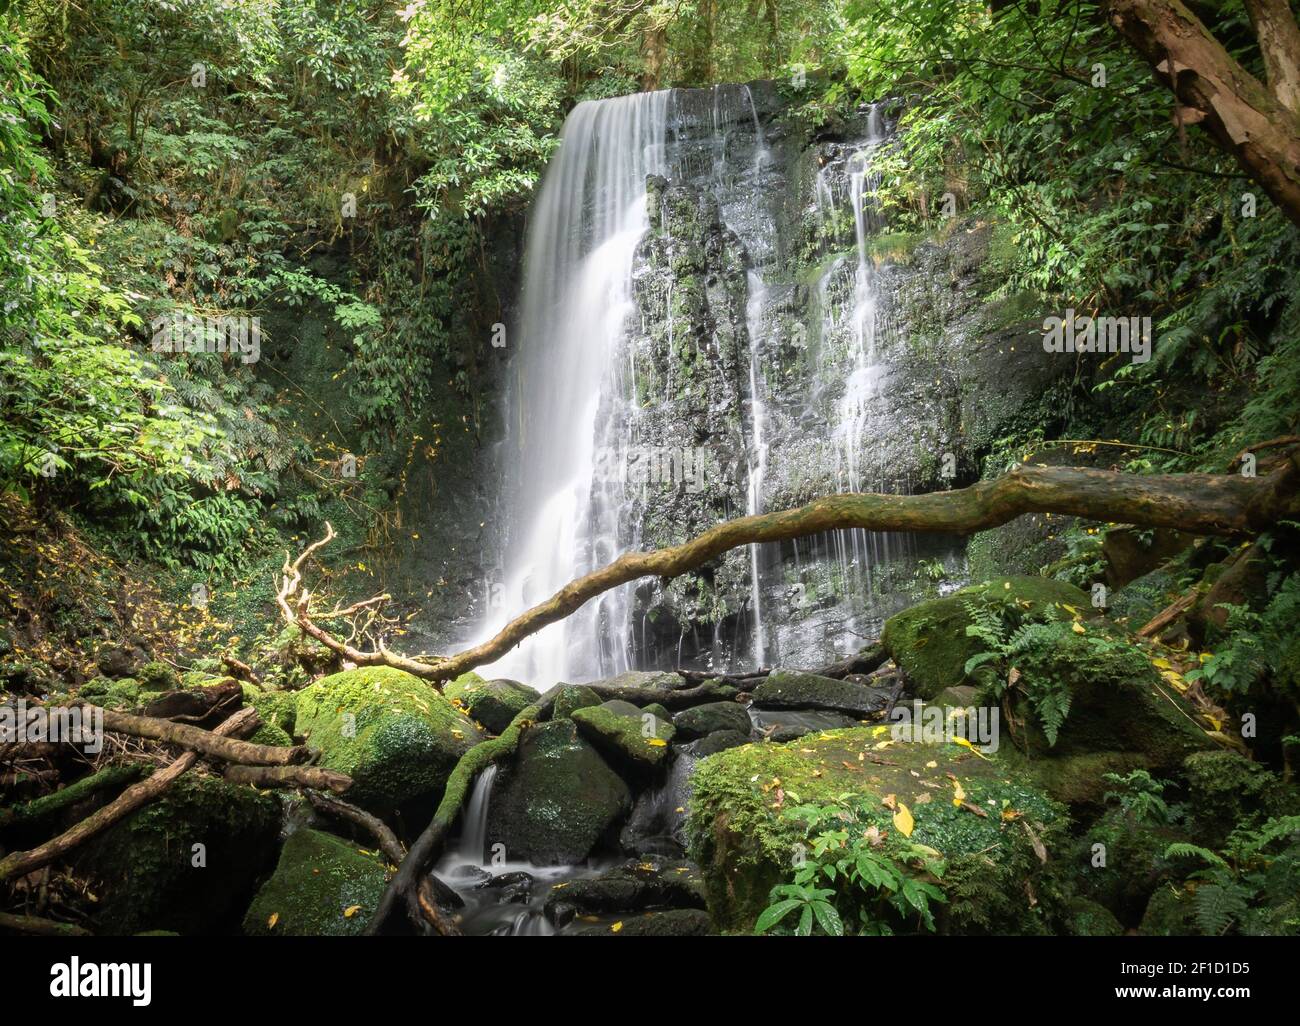 Beautiful small waterfall surrounded by forest. Shot made at Matai Falls in Catlins Forest Park, New Zealand Stock Photo